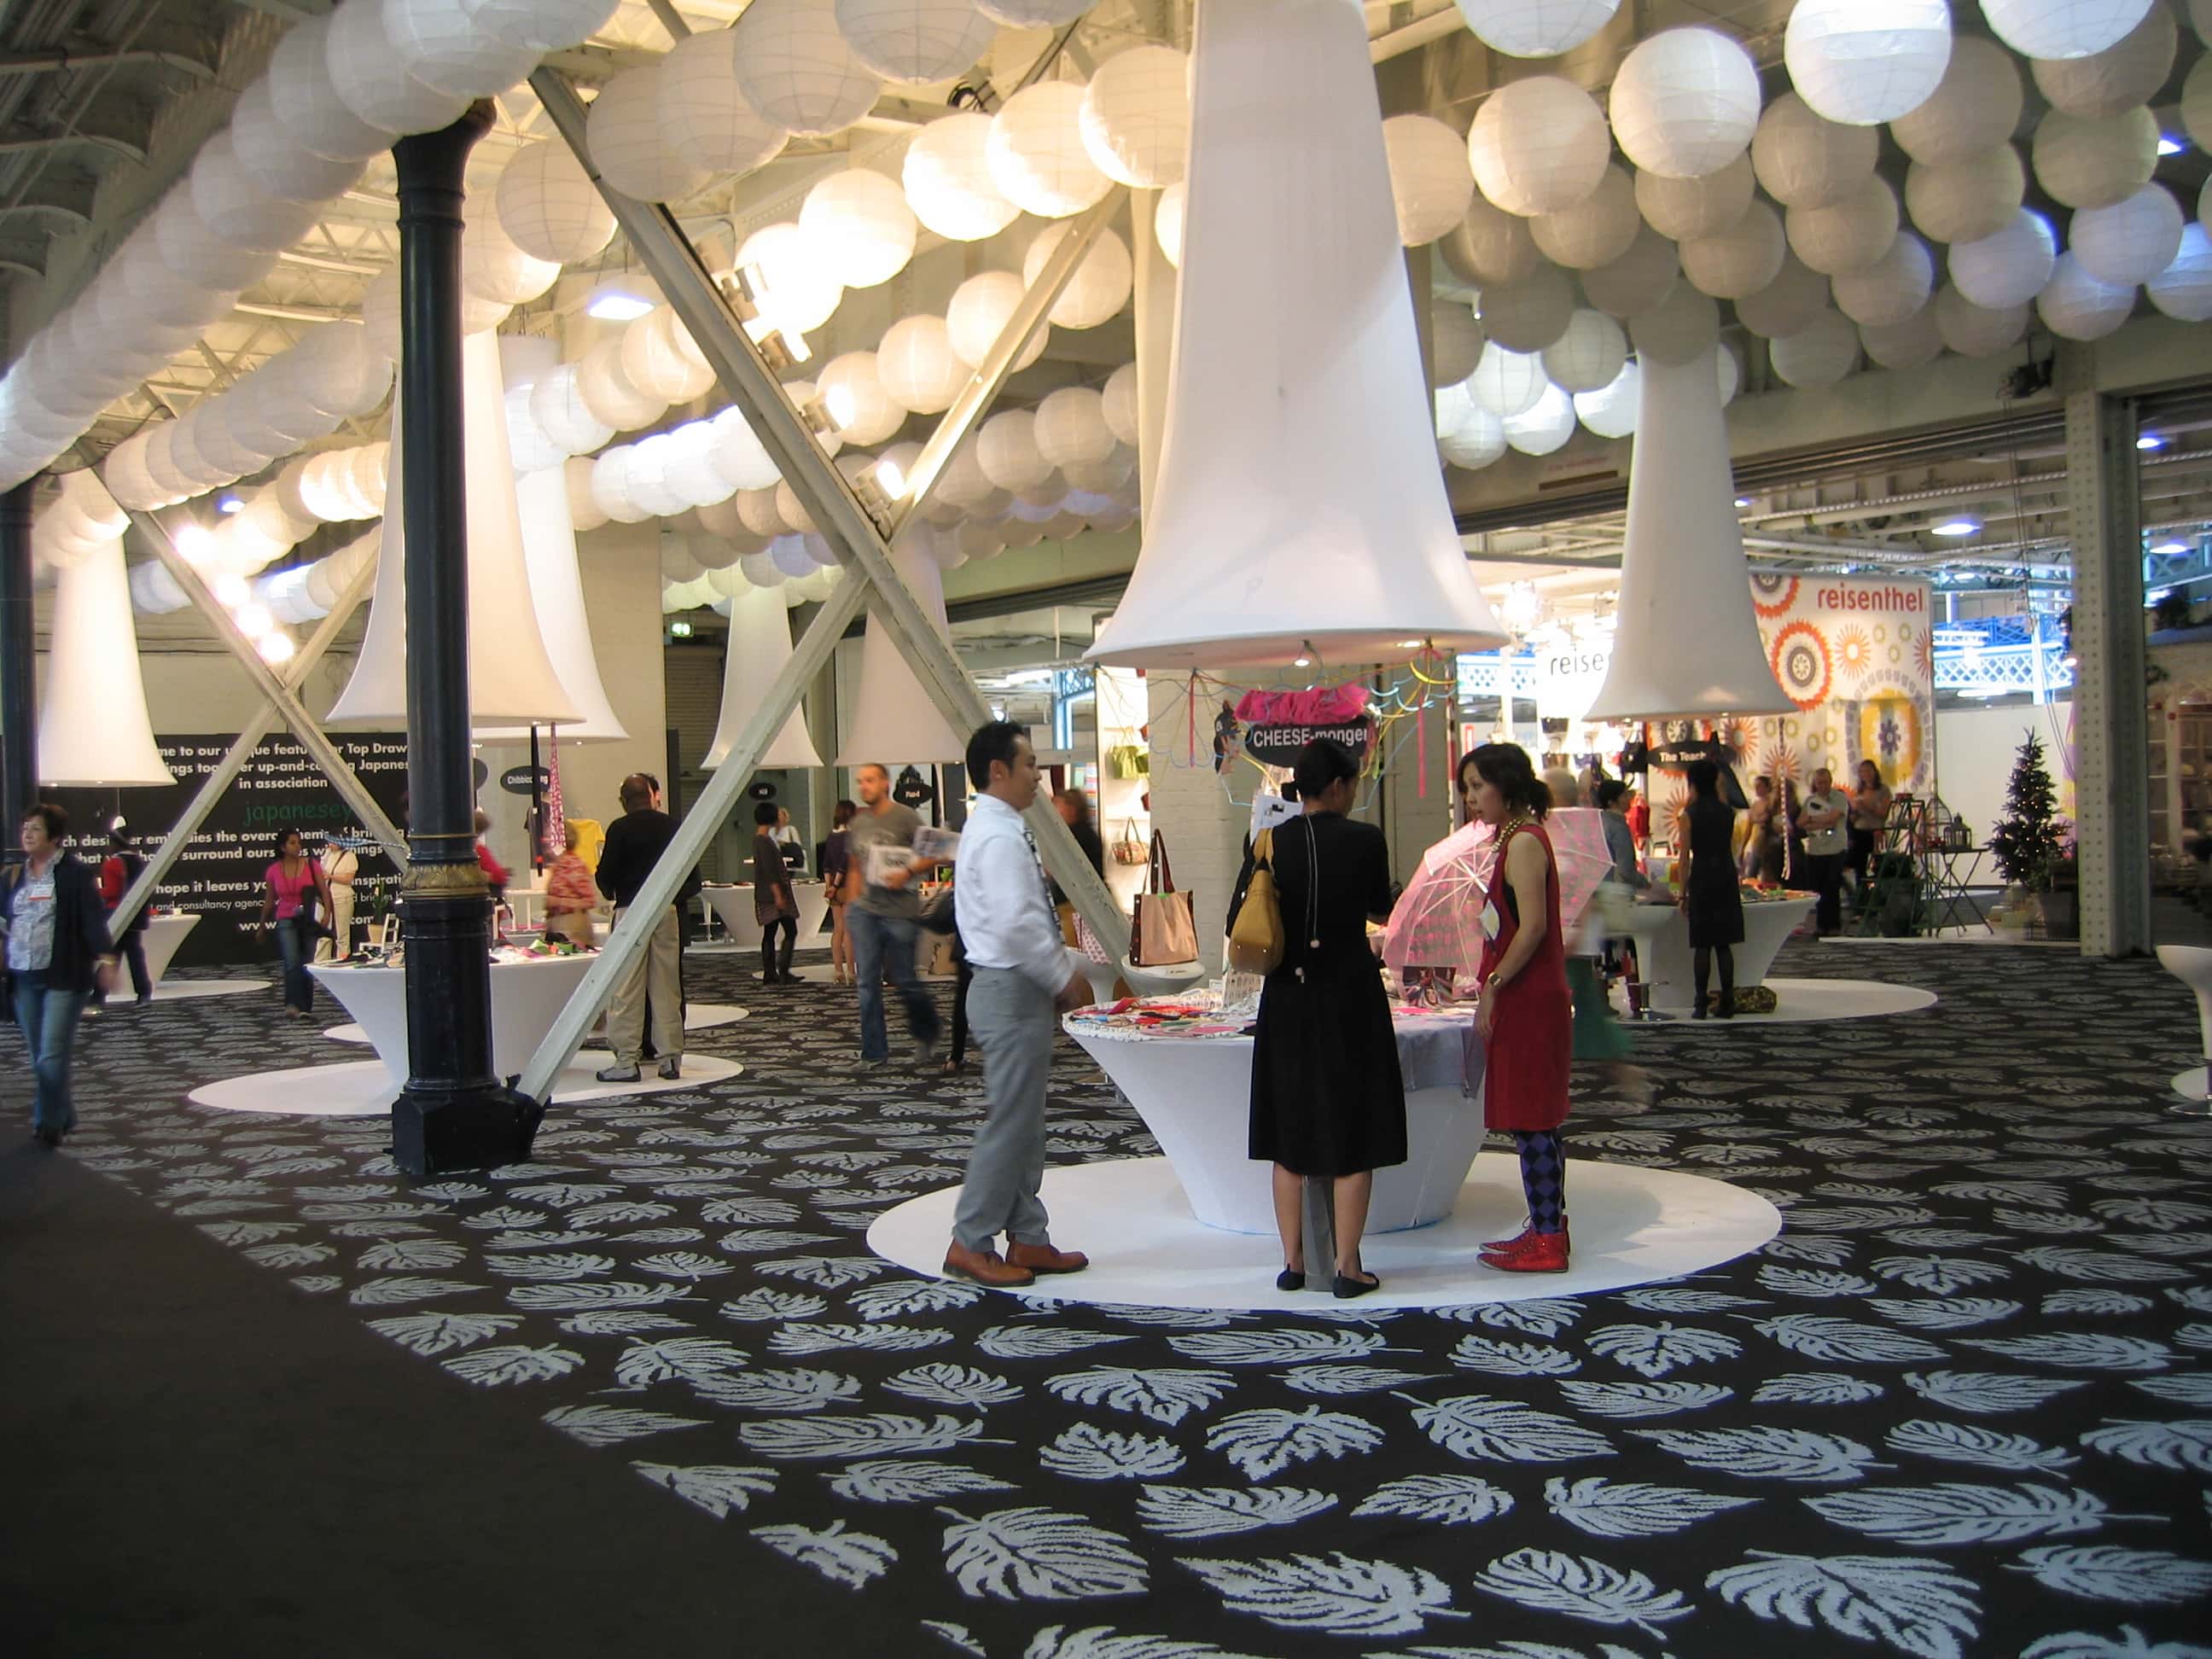 Image of Elea Printed carpet at an Exhibition